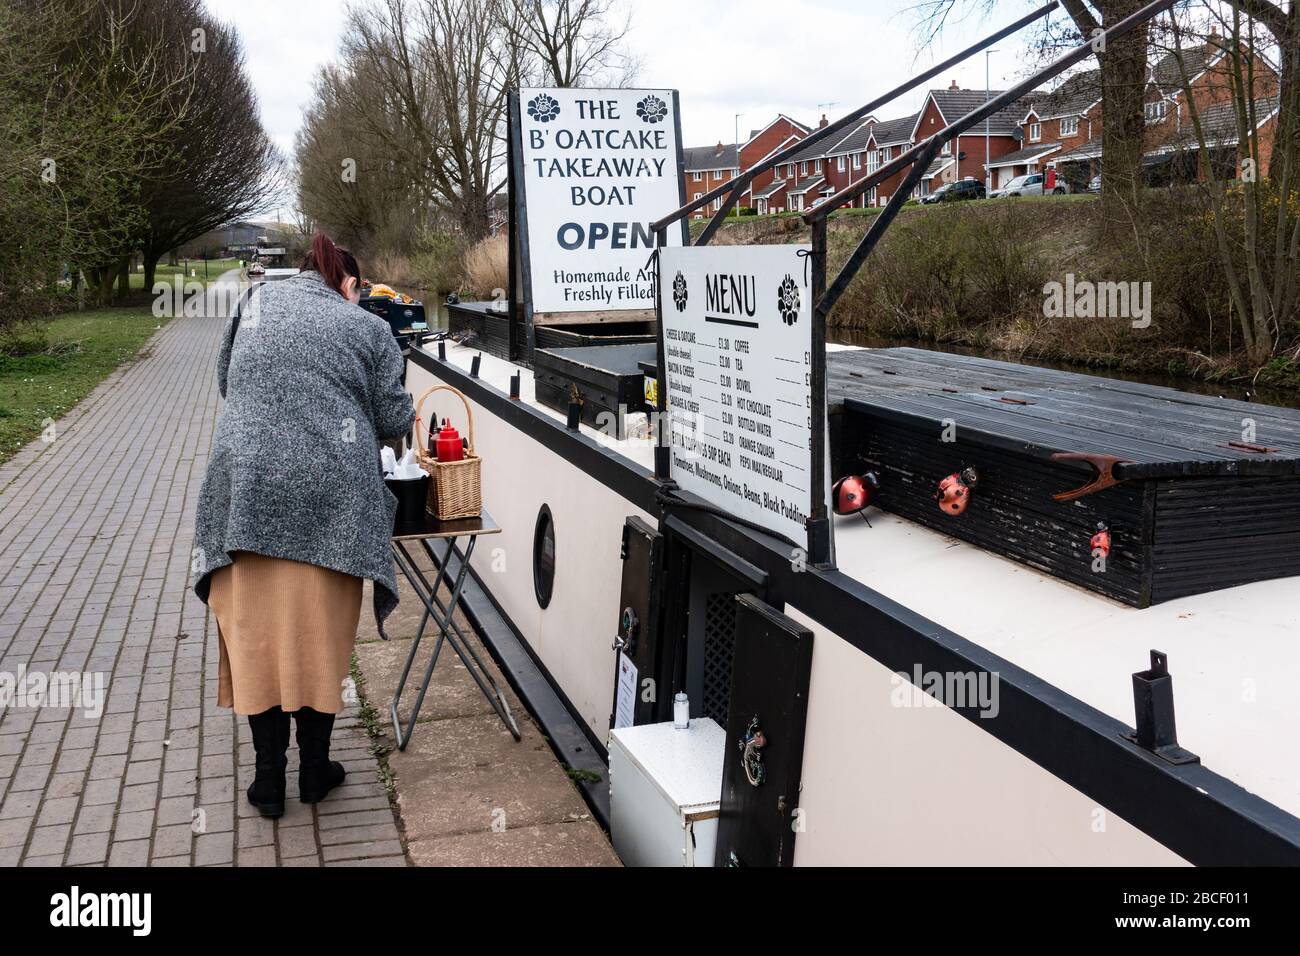 A woman buying food (Staffordshire oatcakes) from a narrowboat ()Que Sara Sara, the B'oatcake boat) on a canal, Stoke-on-Trent, Staffordshire, UK Stock Photo